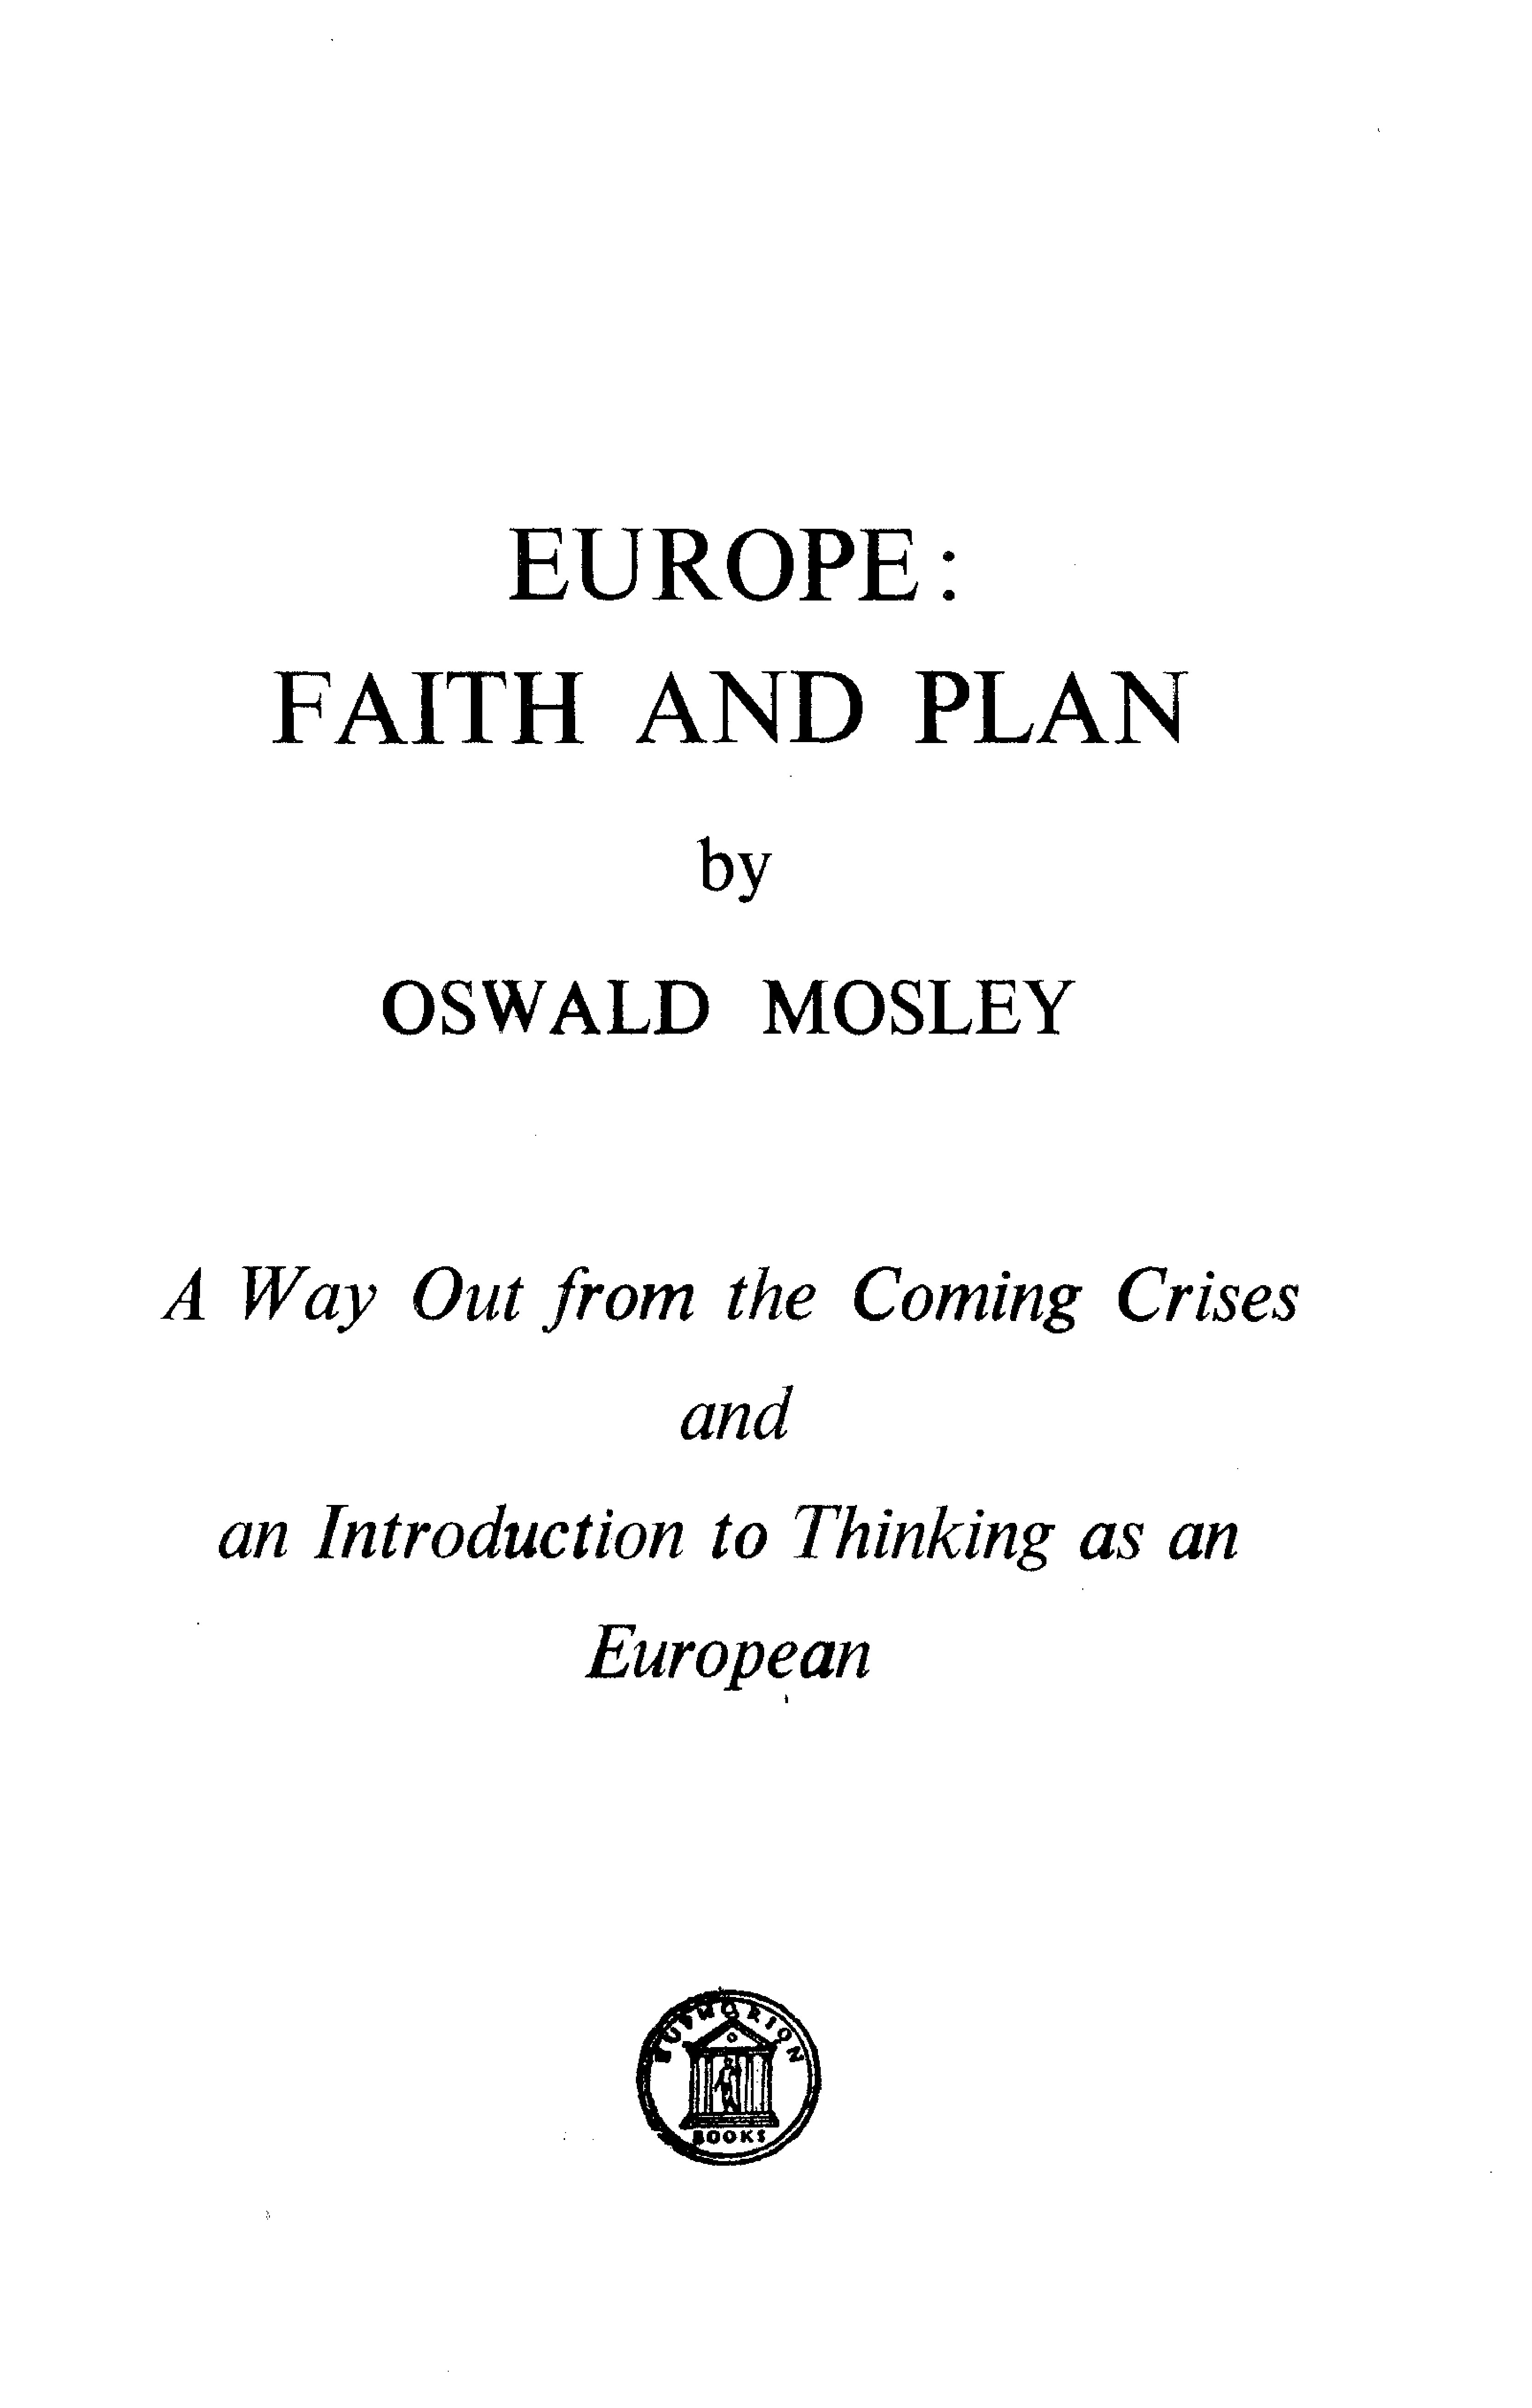 Mosley, Oswald - Europe - Faith and Plan